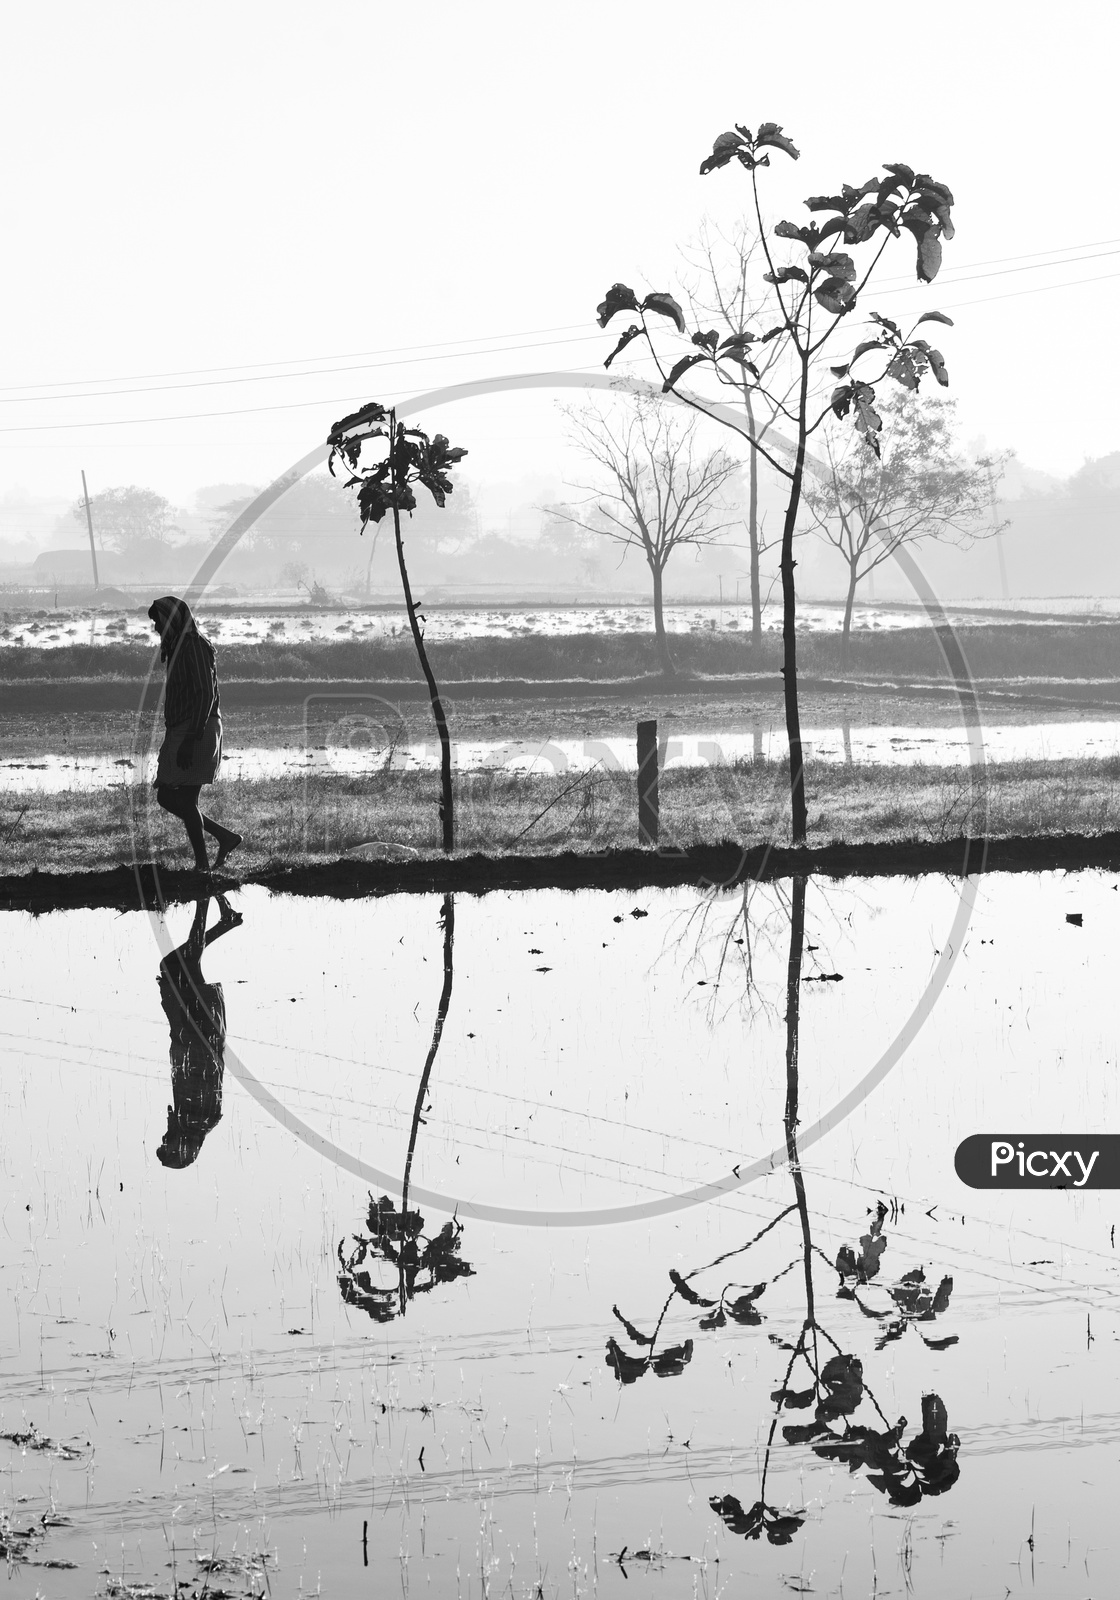 Reflection of a Farmer Walking In a Paddy Field Over Water Surface